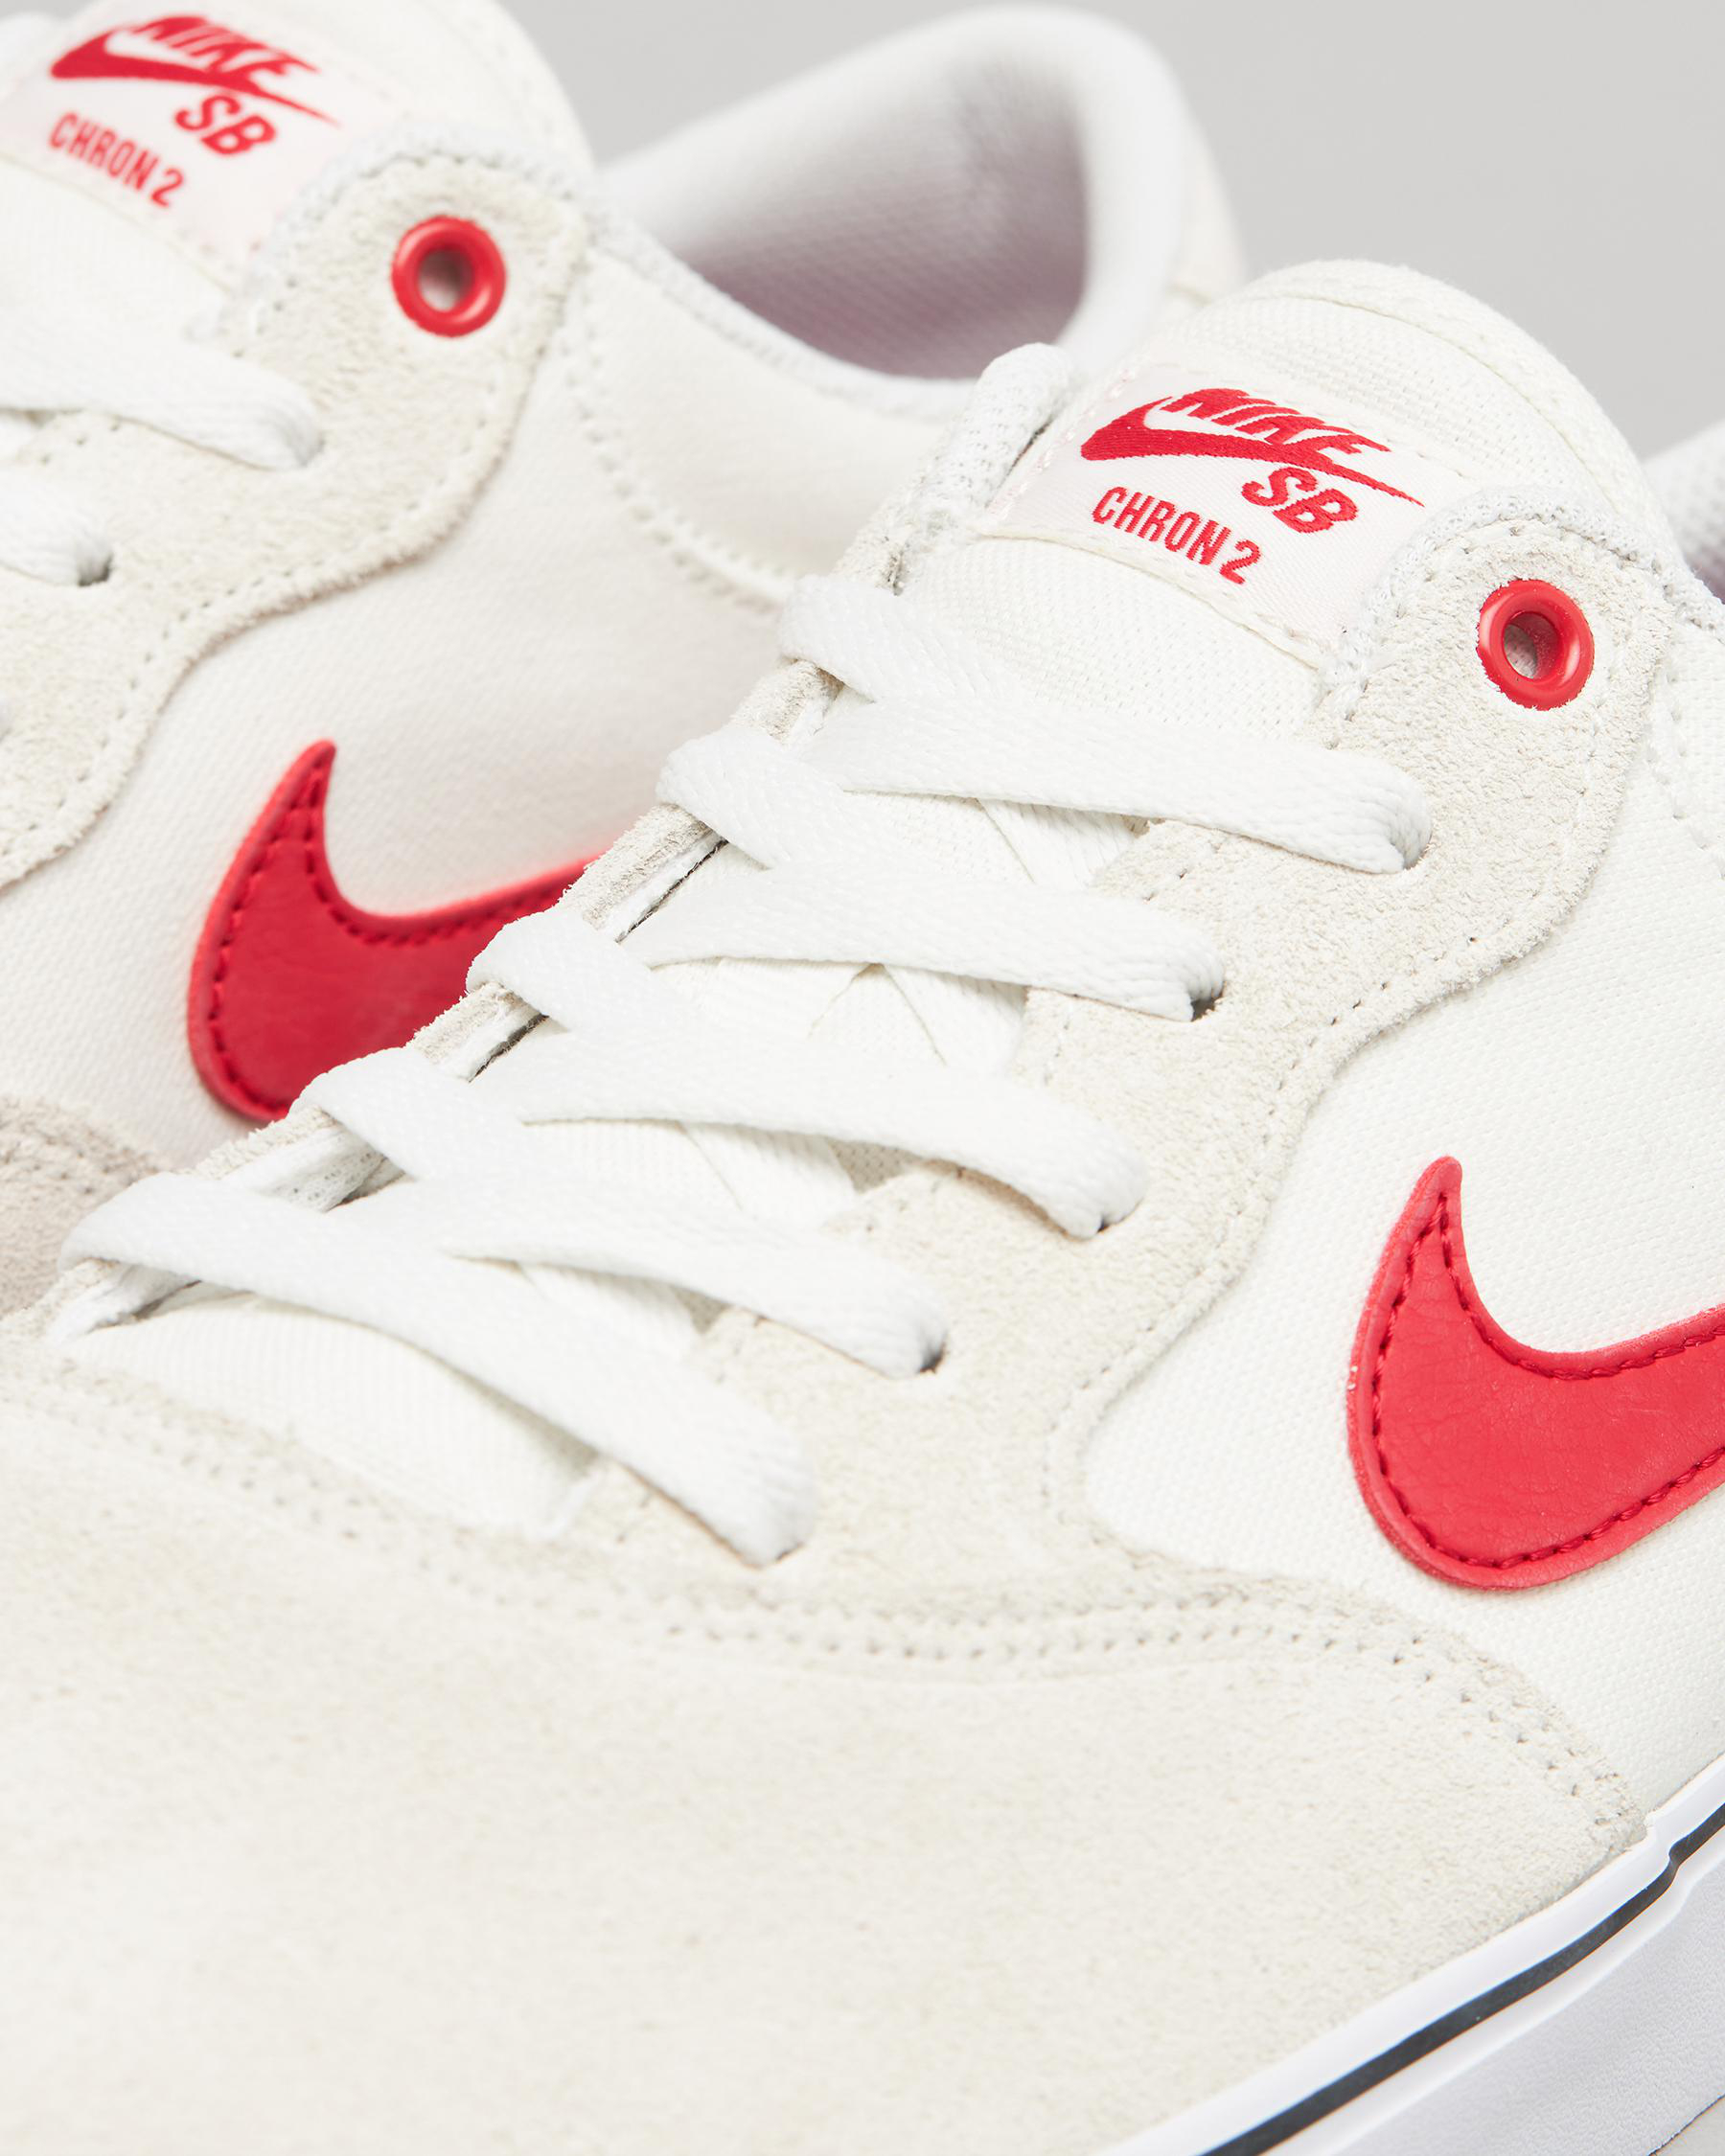 Shop Nike Womens SB Chron 2 Shoes In Summit White/university Red - Fast ...